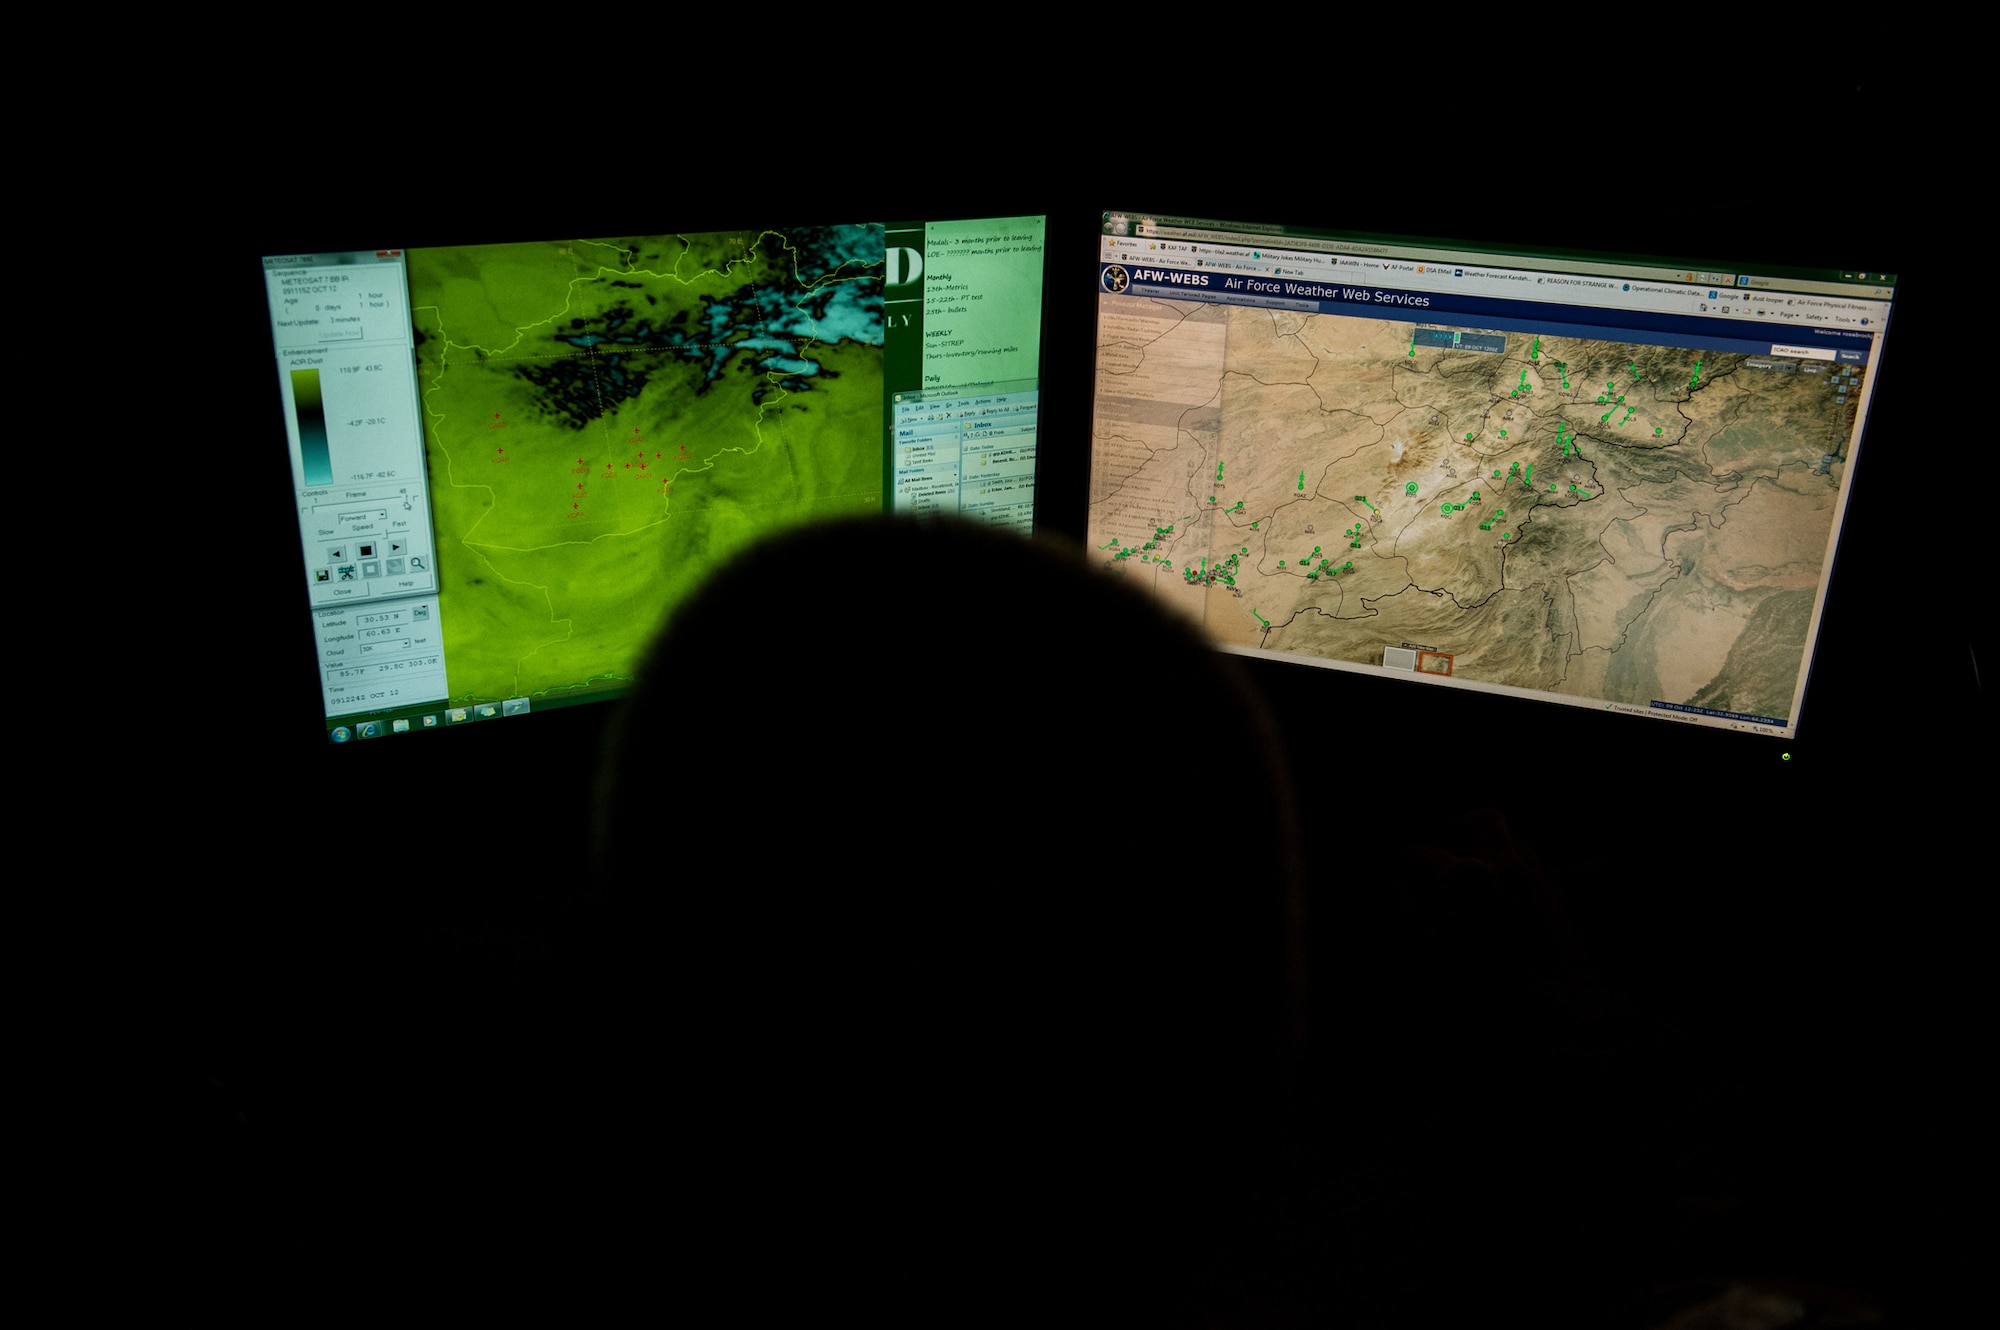 U.S. Air Force Master Sgt. James Rosebrock, 19th Expeditionary Weather Squadron, battlefield weather forecaster, monitors weather data on Oct. 9, 2012, Kandahar Airfield, Afghanistan. The 19th EWS provides Army ground commanders with accurate and real-time weather conditions and offers alternative options to help commanders make informed decisions on combat operations. Rosebrock's hometown is Hutchinson, Minn. (U.S. Air Force photo/Staff Sgt. Jonathan Snyder)